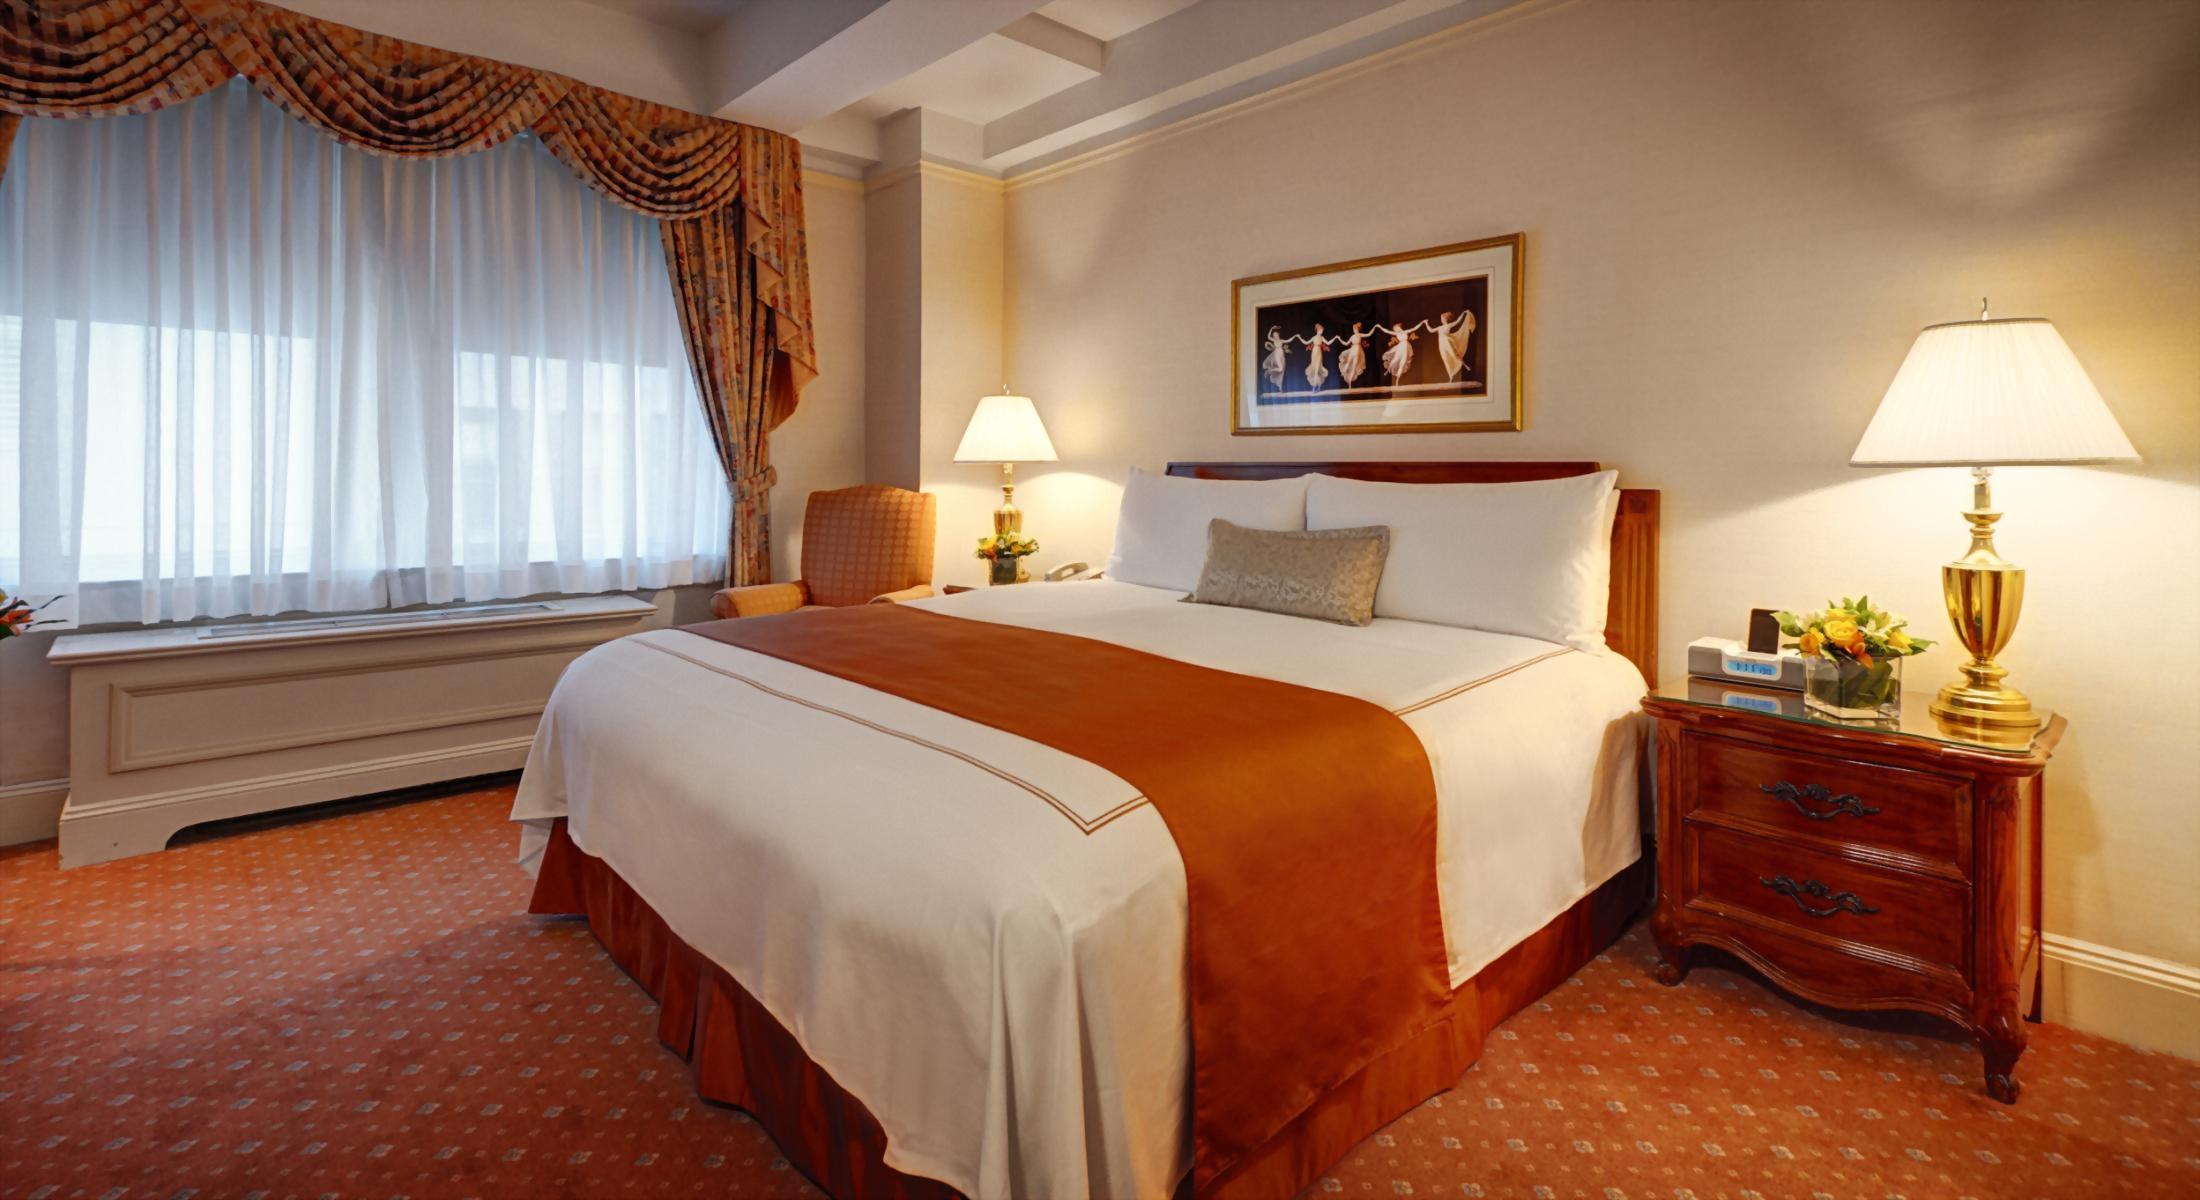 Deluxe King Room at the Hotel Elysee with 1 King Bed.  Approximately 300 square feet and comfortable for up to 2 adult guests.